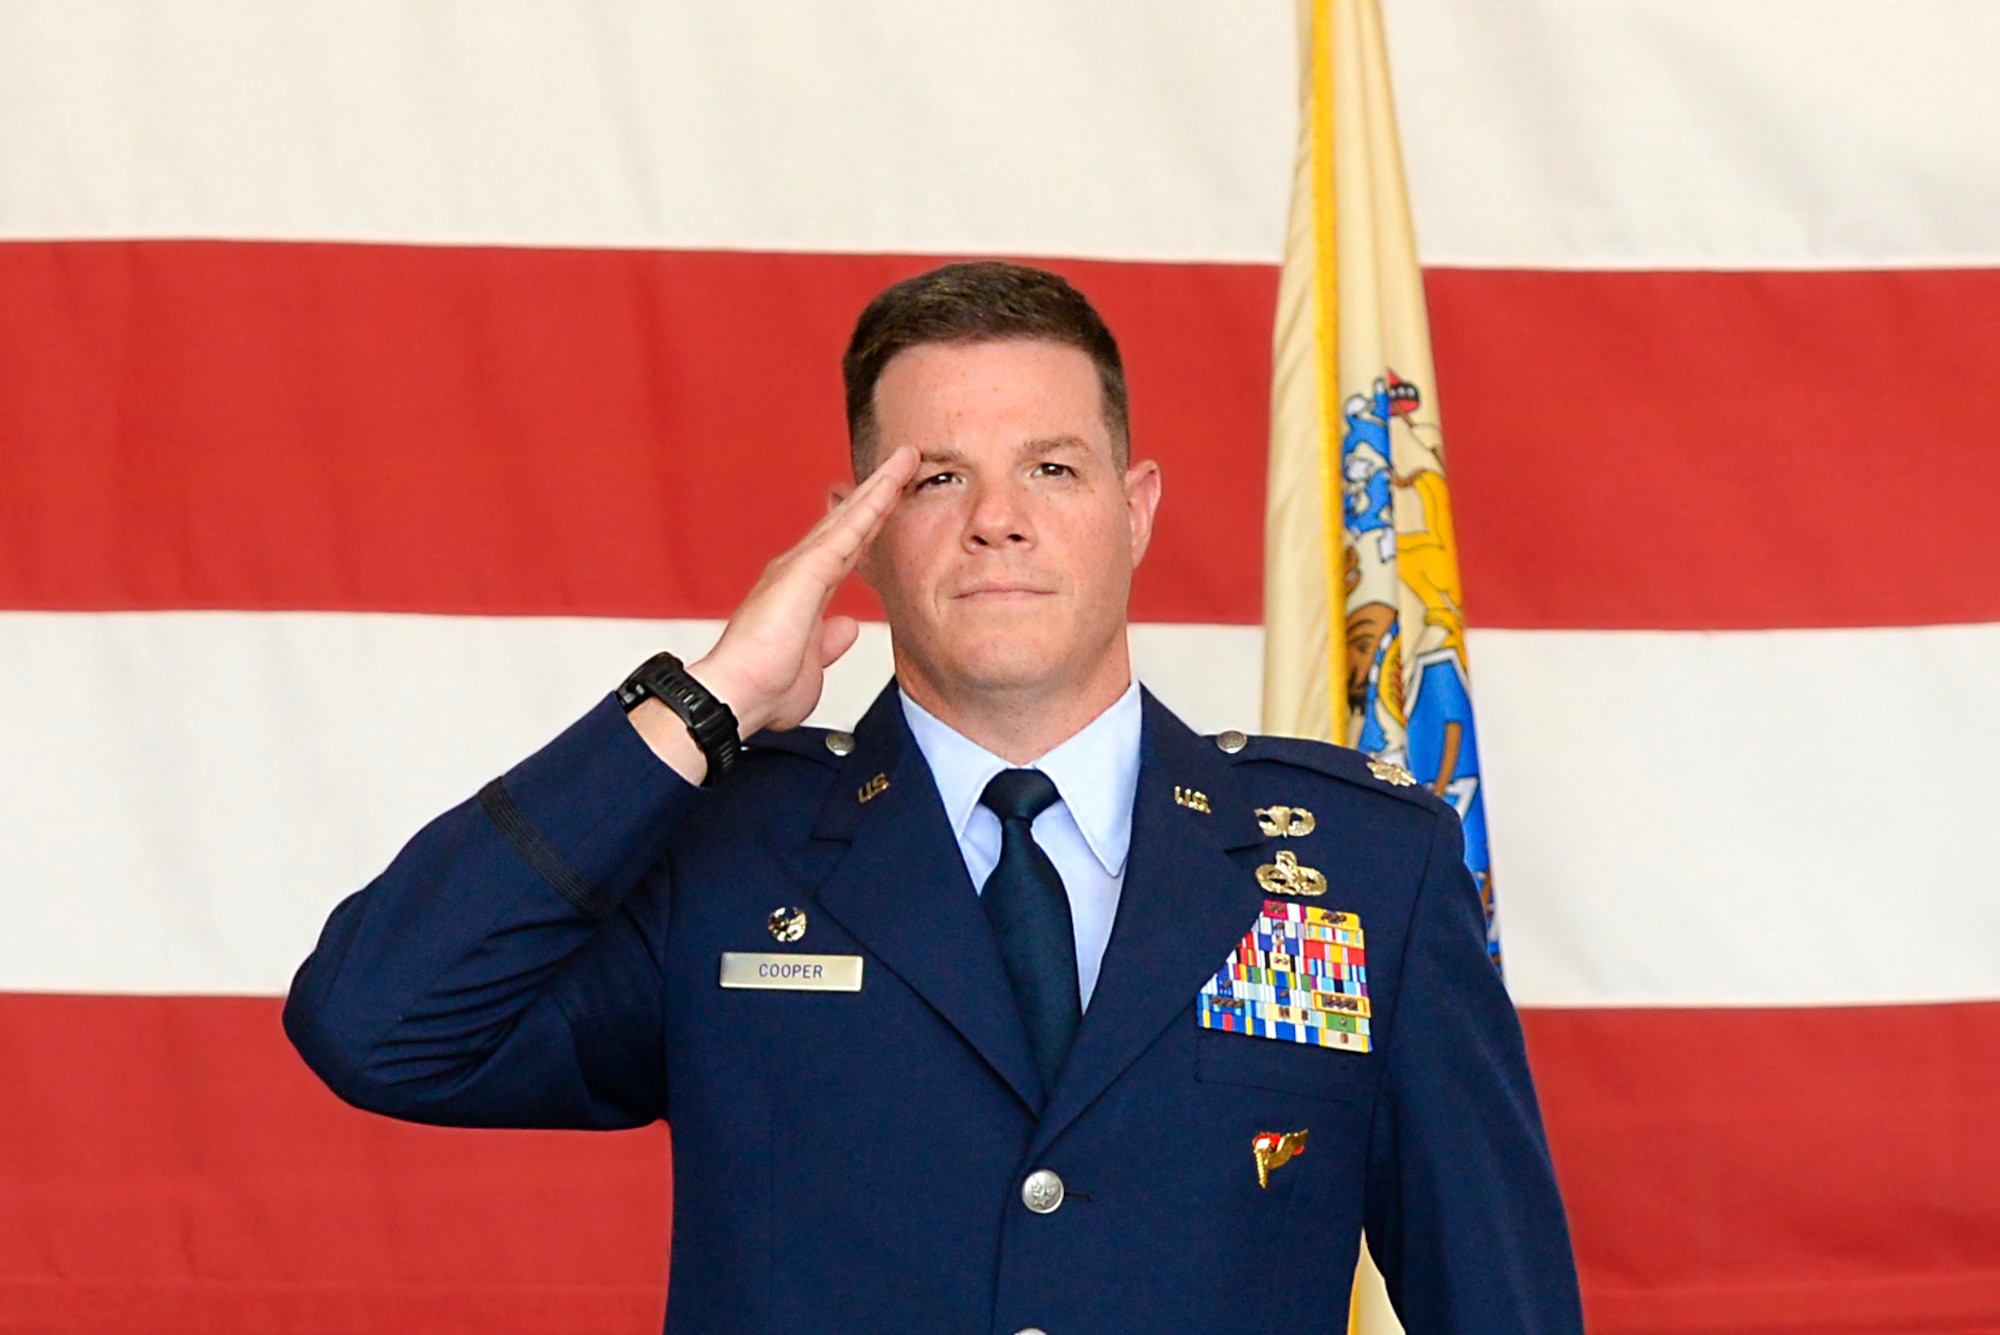 Lt. Col. Brian Cooper renders his first salute to the 177th MXG during its Change of Command ceremony